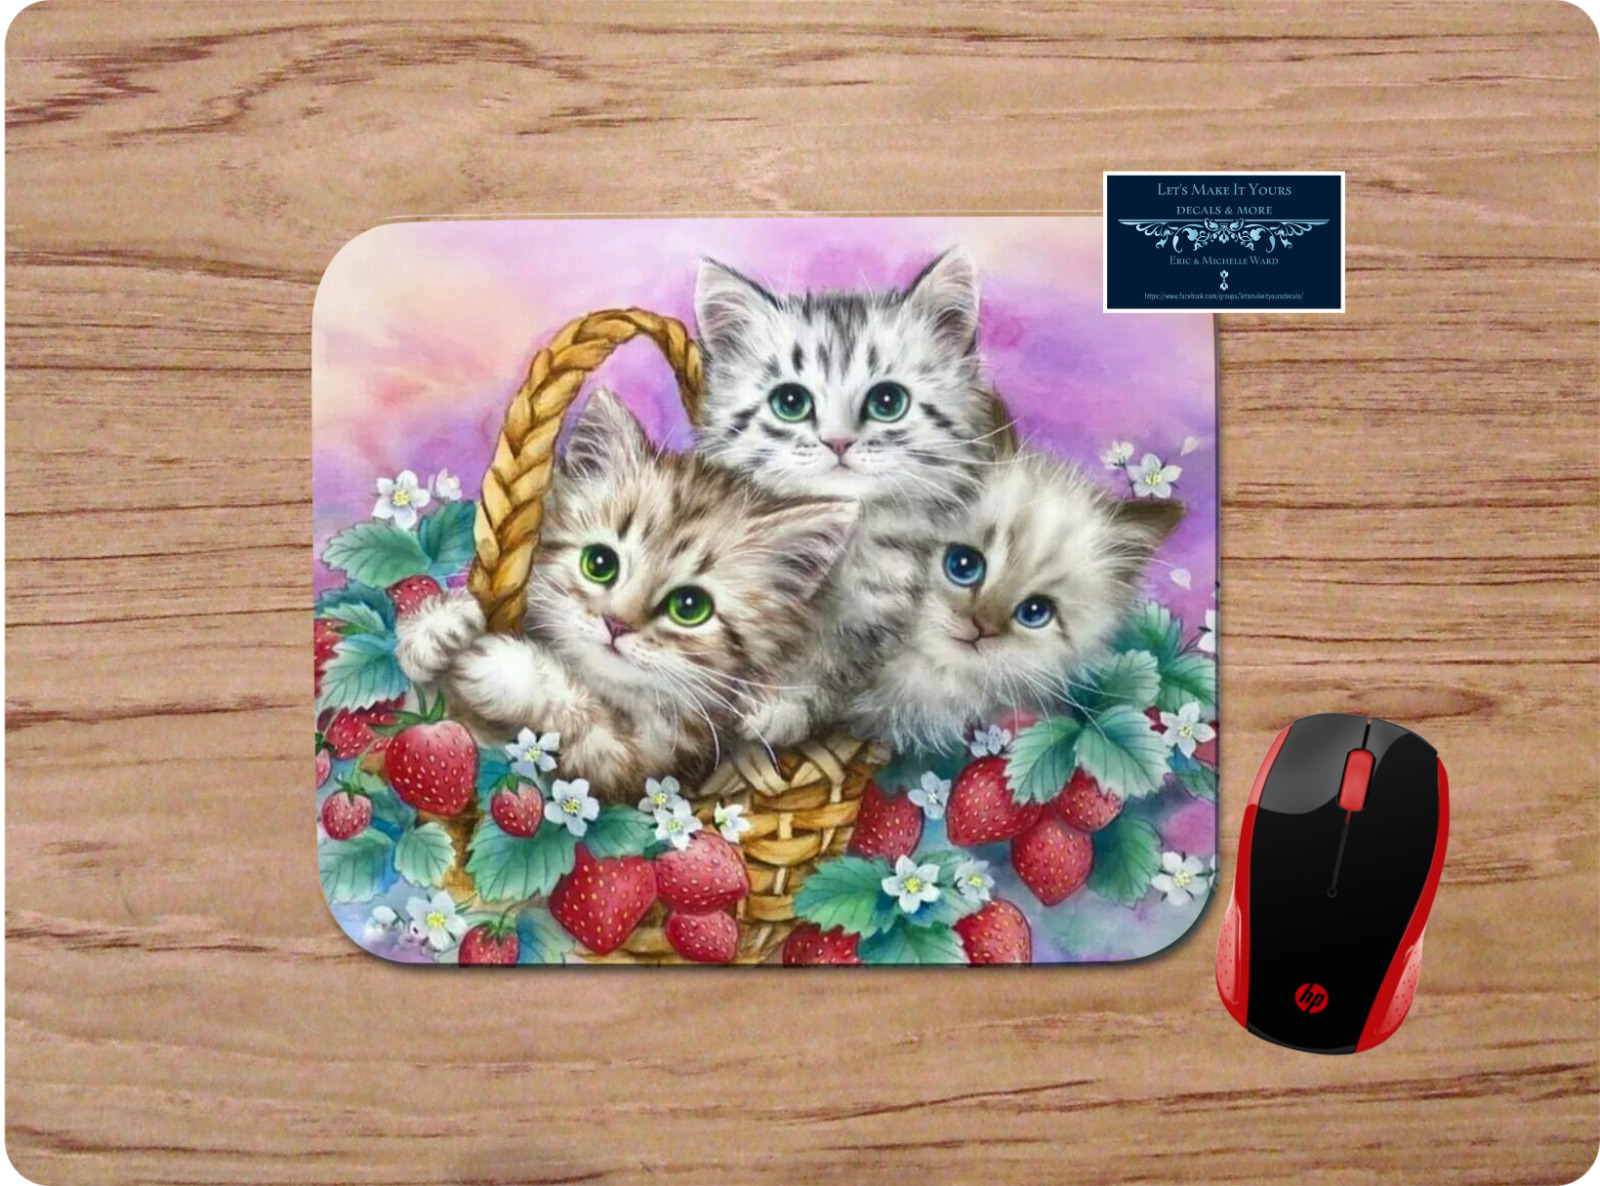 KITTENS IN A BASKET STRAWBERRY ART CUSTOM PC MOUSE PAD DESK MAT HOME OFFICE GIFT